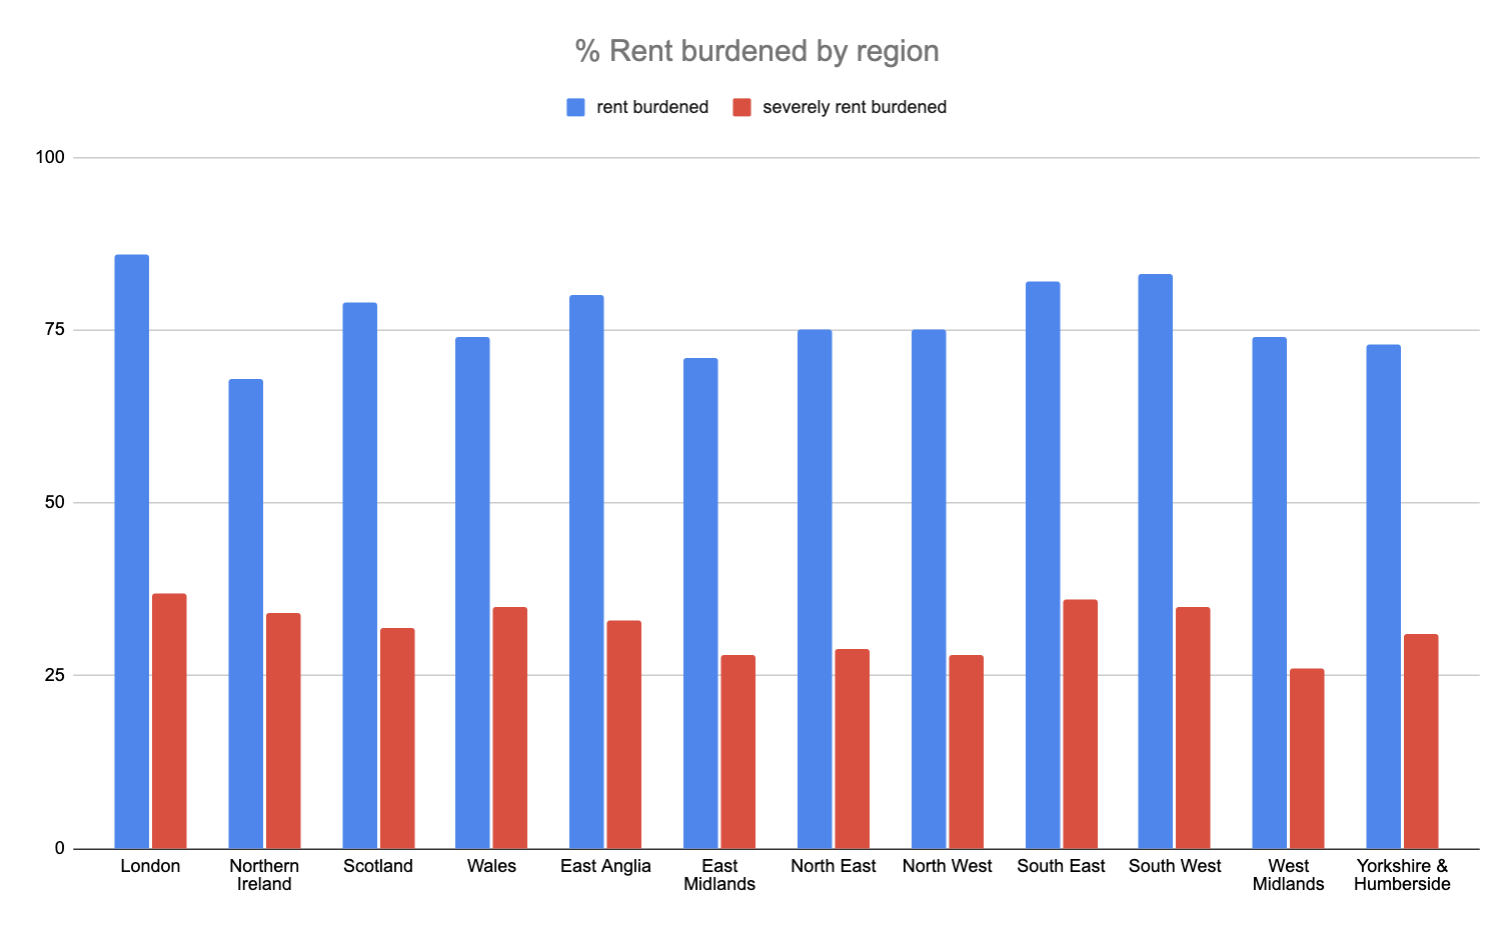 Chart showing percent of renters burdened by region